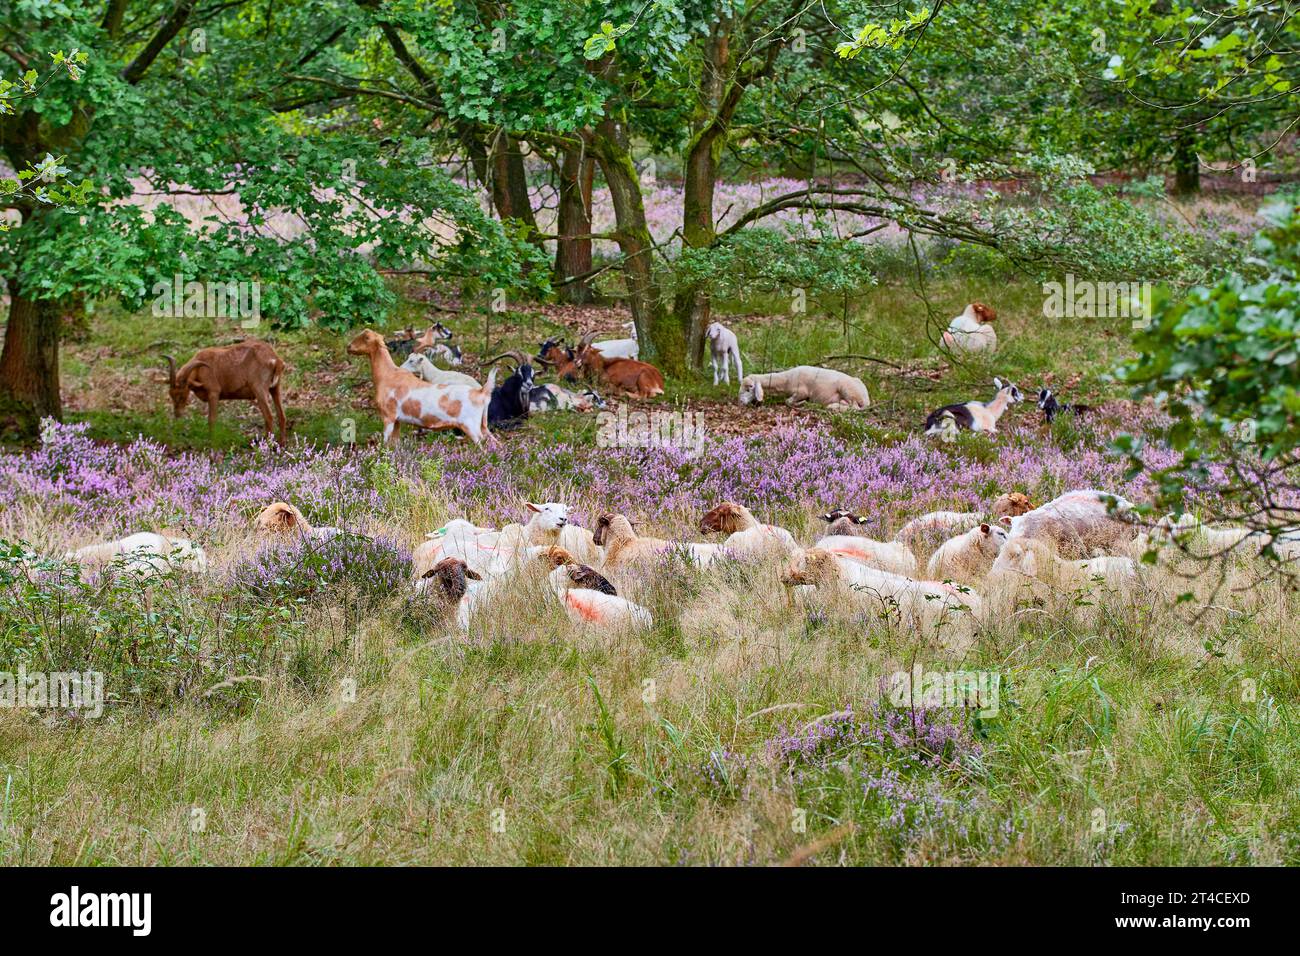 sheep and goats grazing a heath succession area, Germany, Hesse Stock Photo